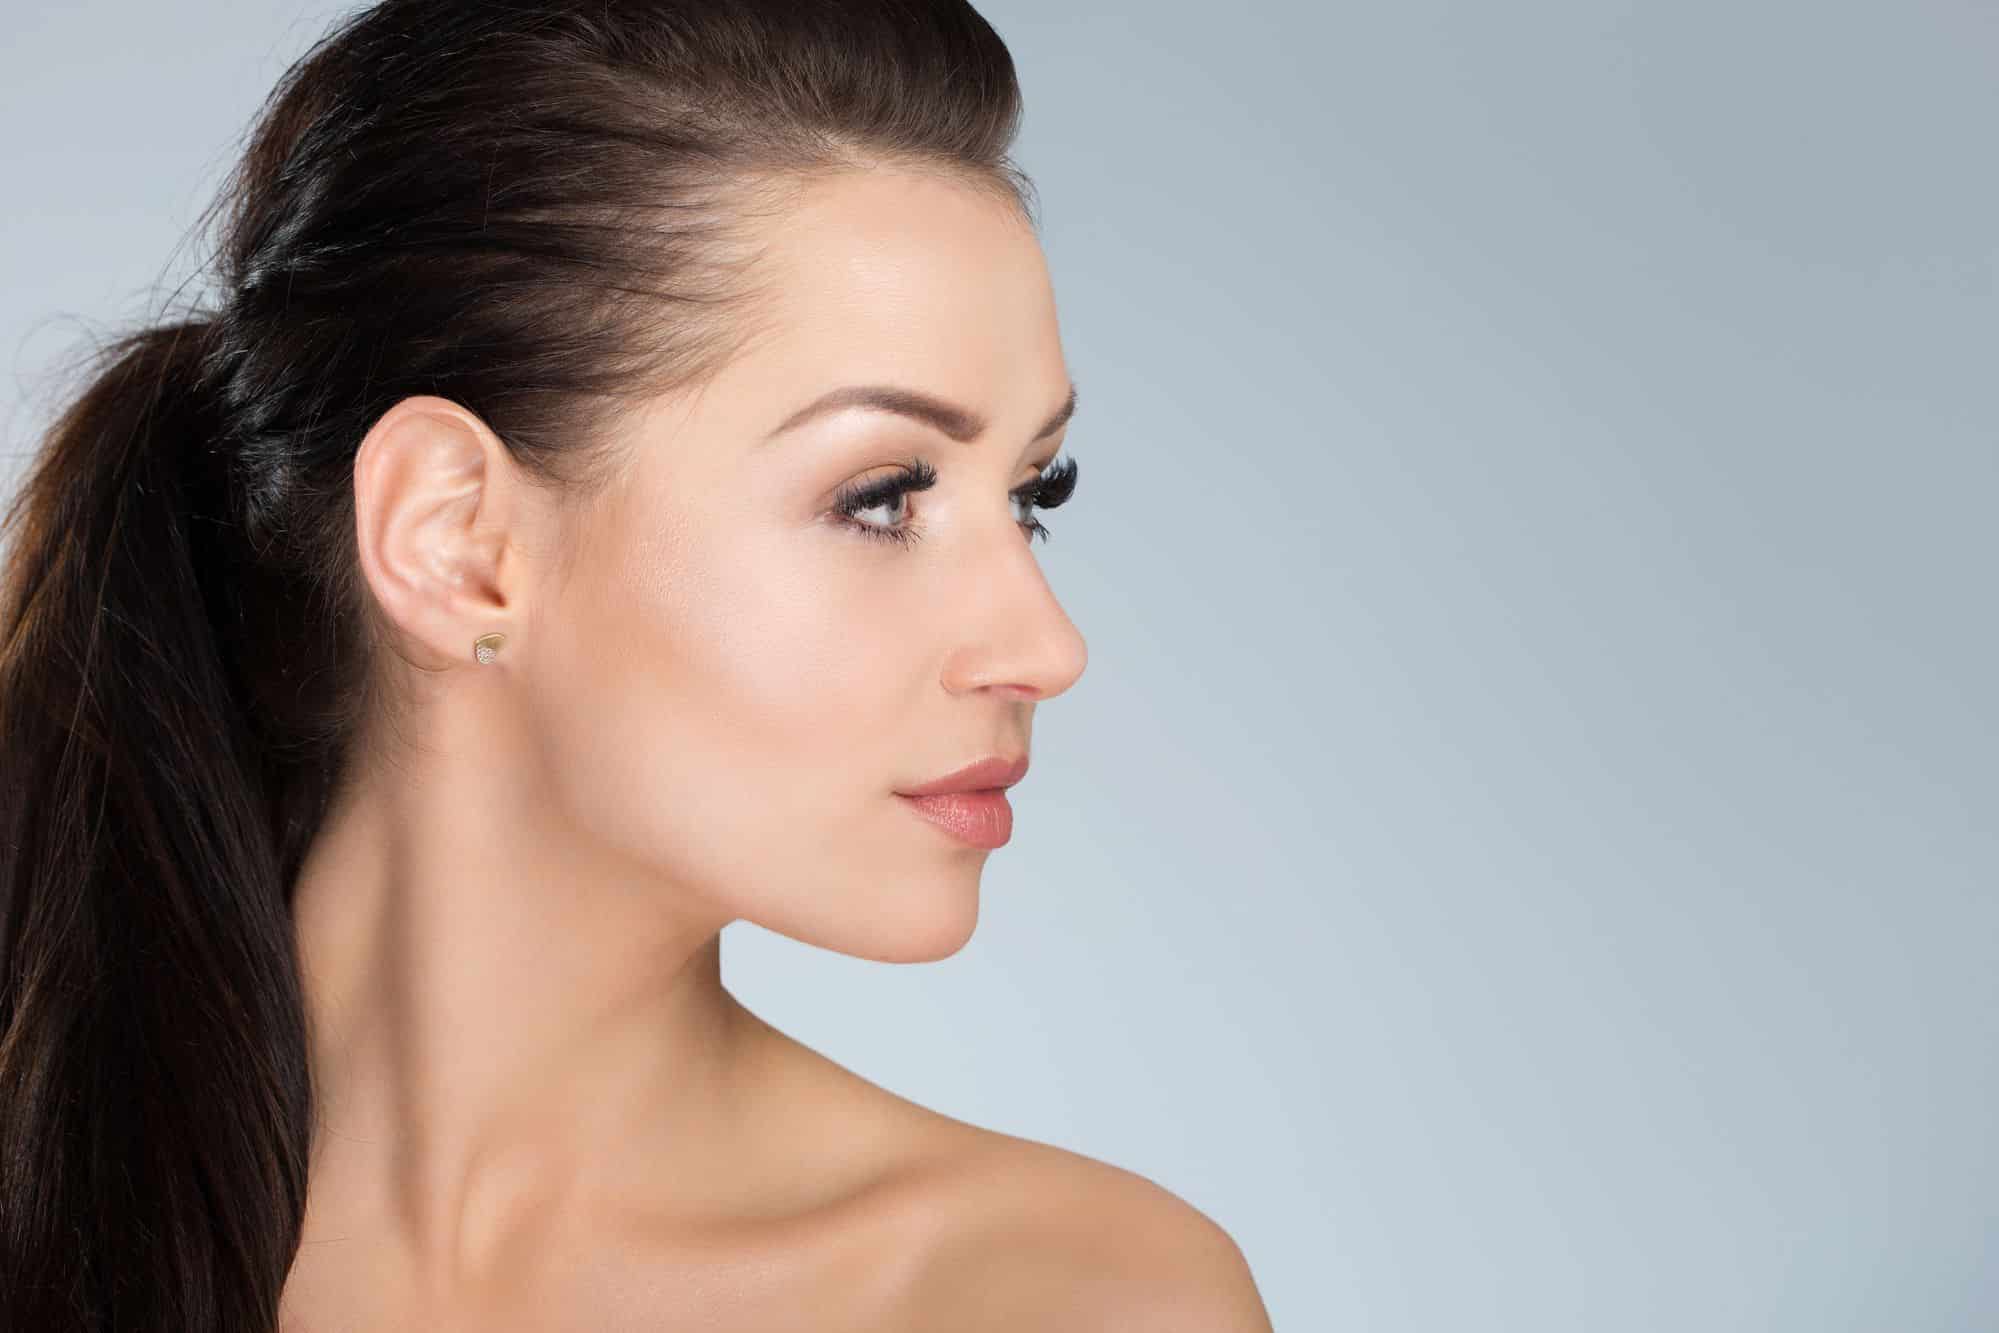 Jaw Botox for Jaw Slimming Singapore - Edwin Lim Medical Aesthetic Clinic